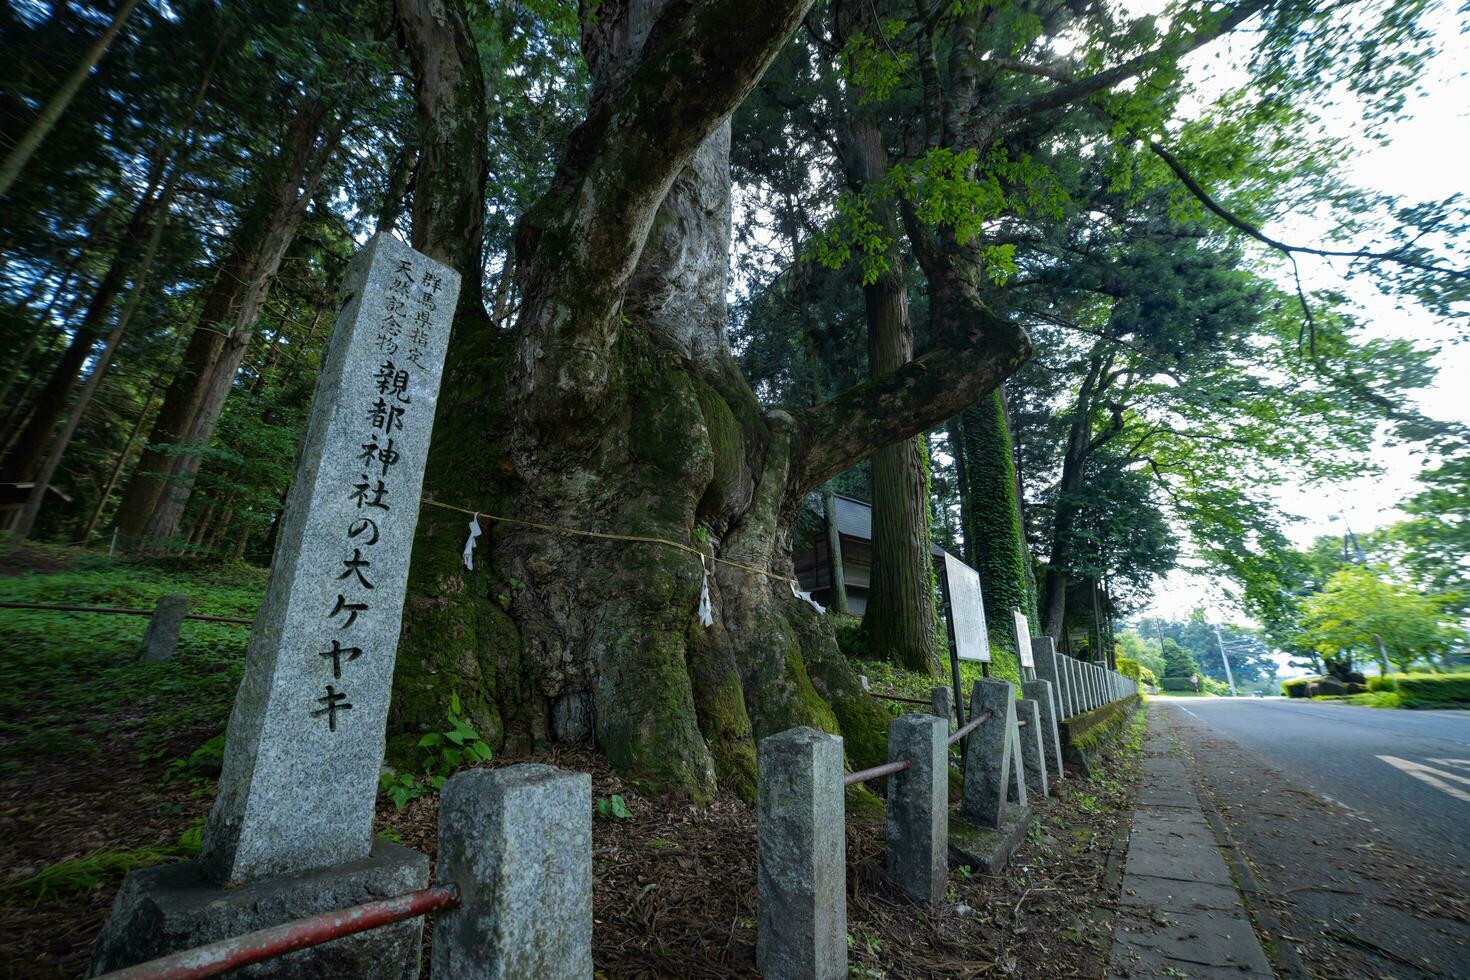 A Japanese zelkova tree in front of the shrine at the countryside photo